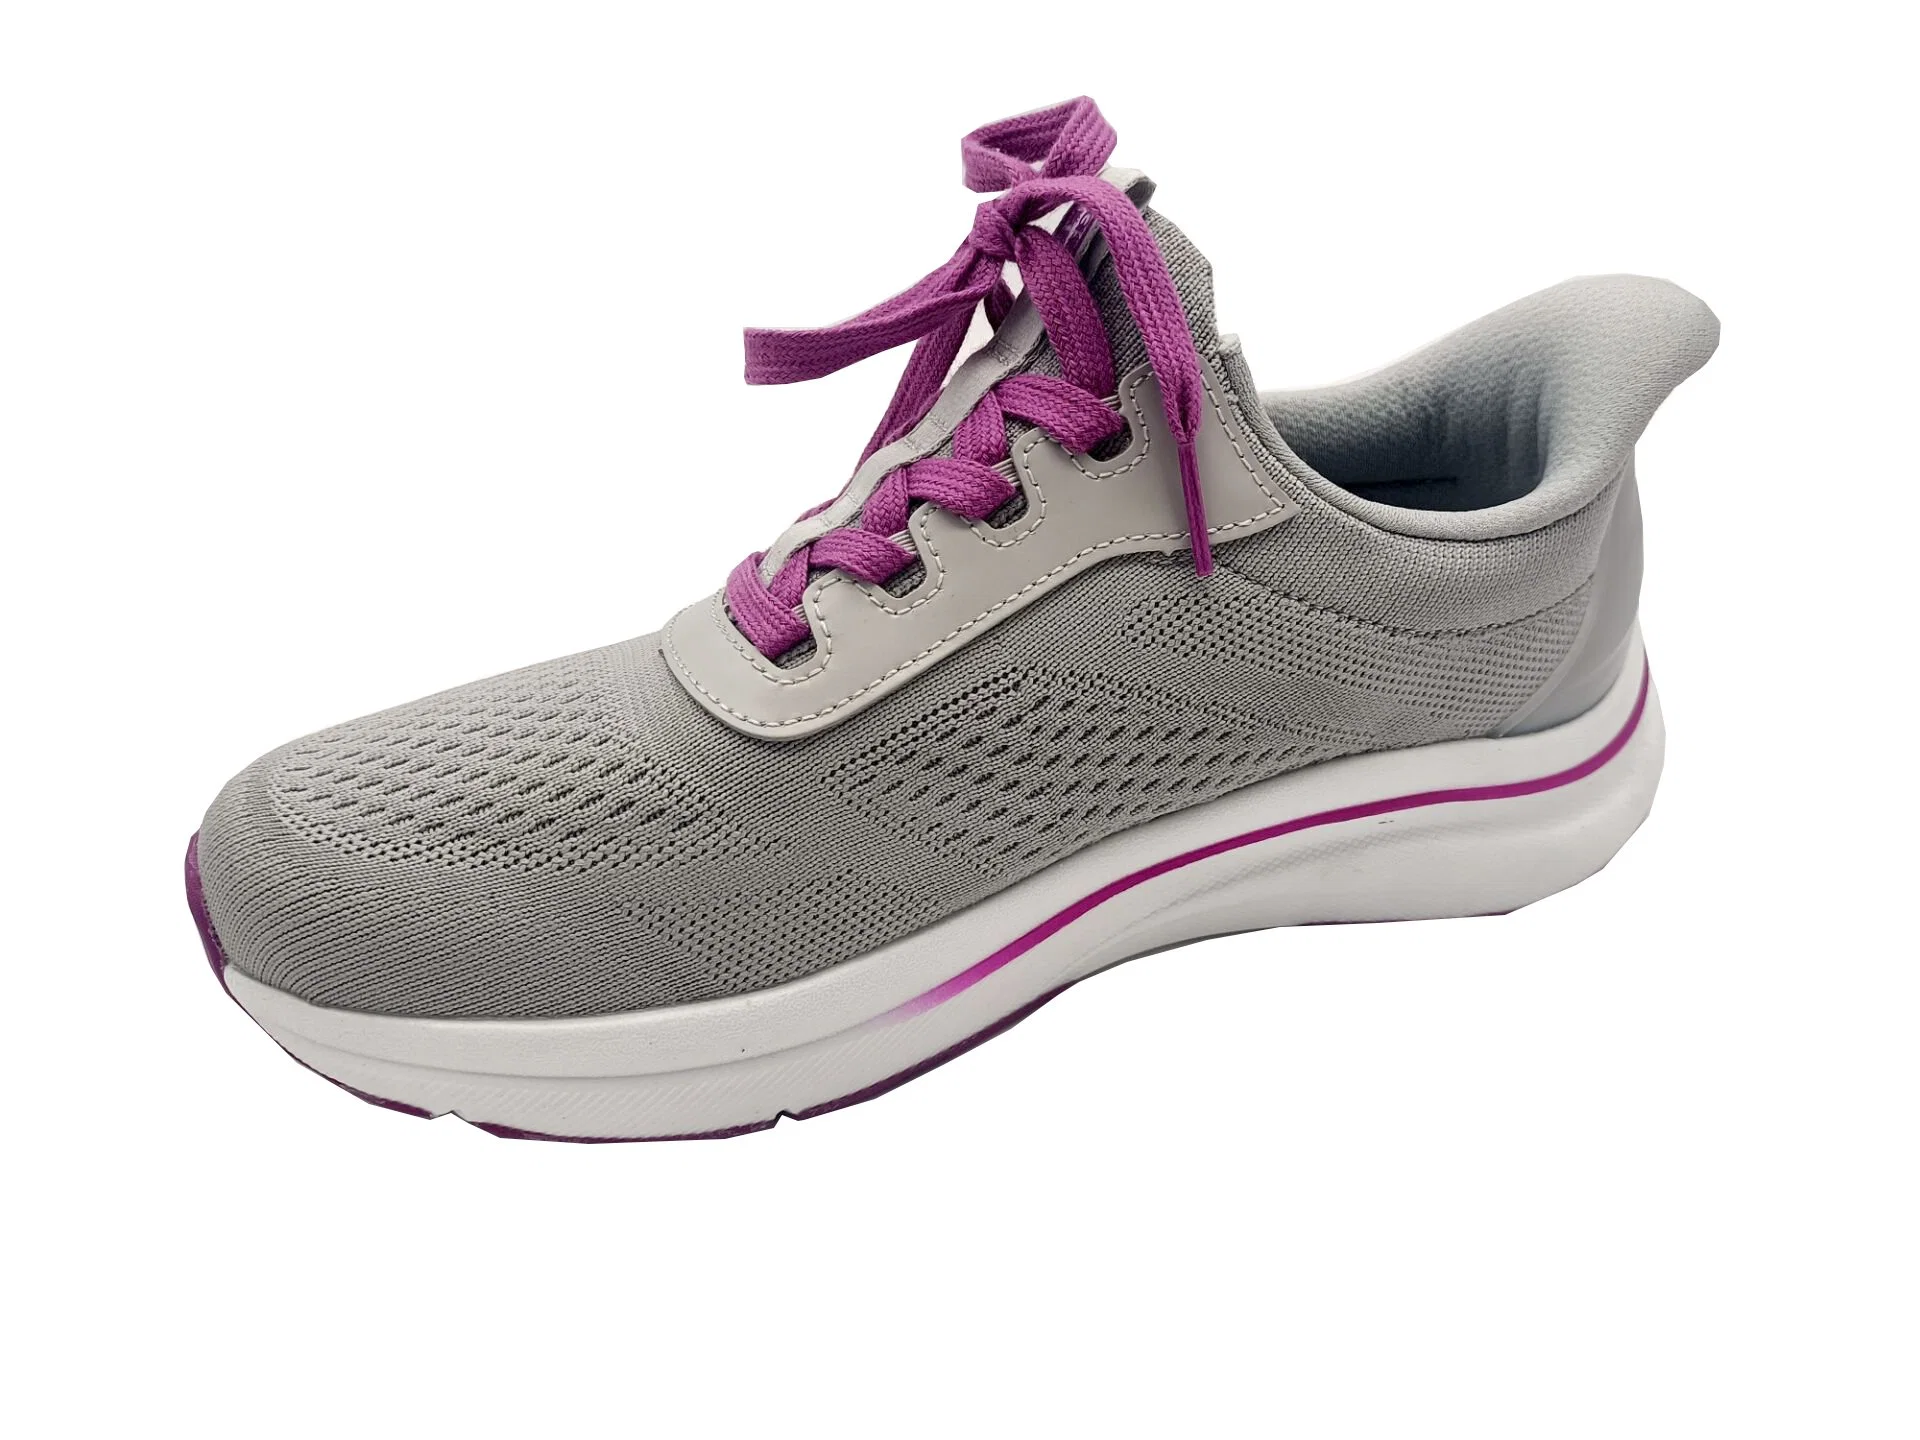 Ladies Casual Sneakers New Spring Autumn Fashion Footwear Breathable Lace-up Sports Shoes